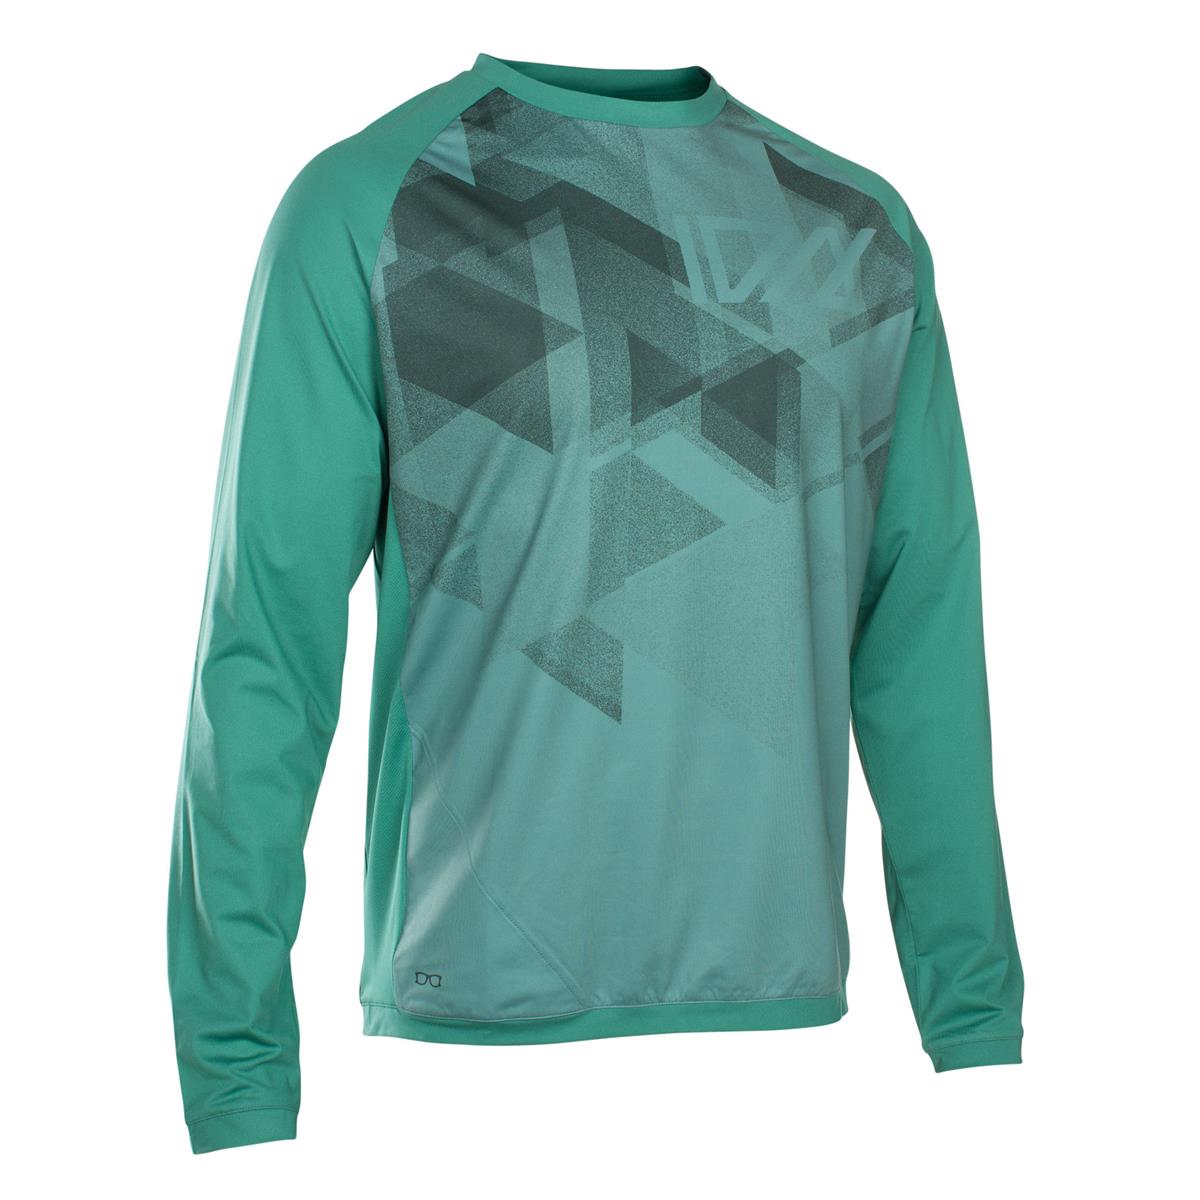 ION Maillot VTT Manches Longues Traze Amp Sea Green